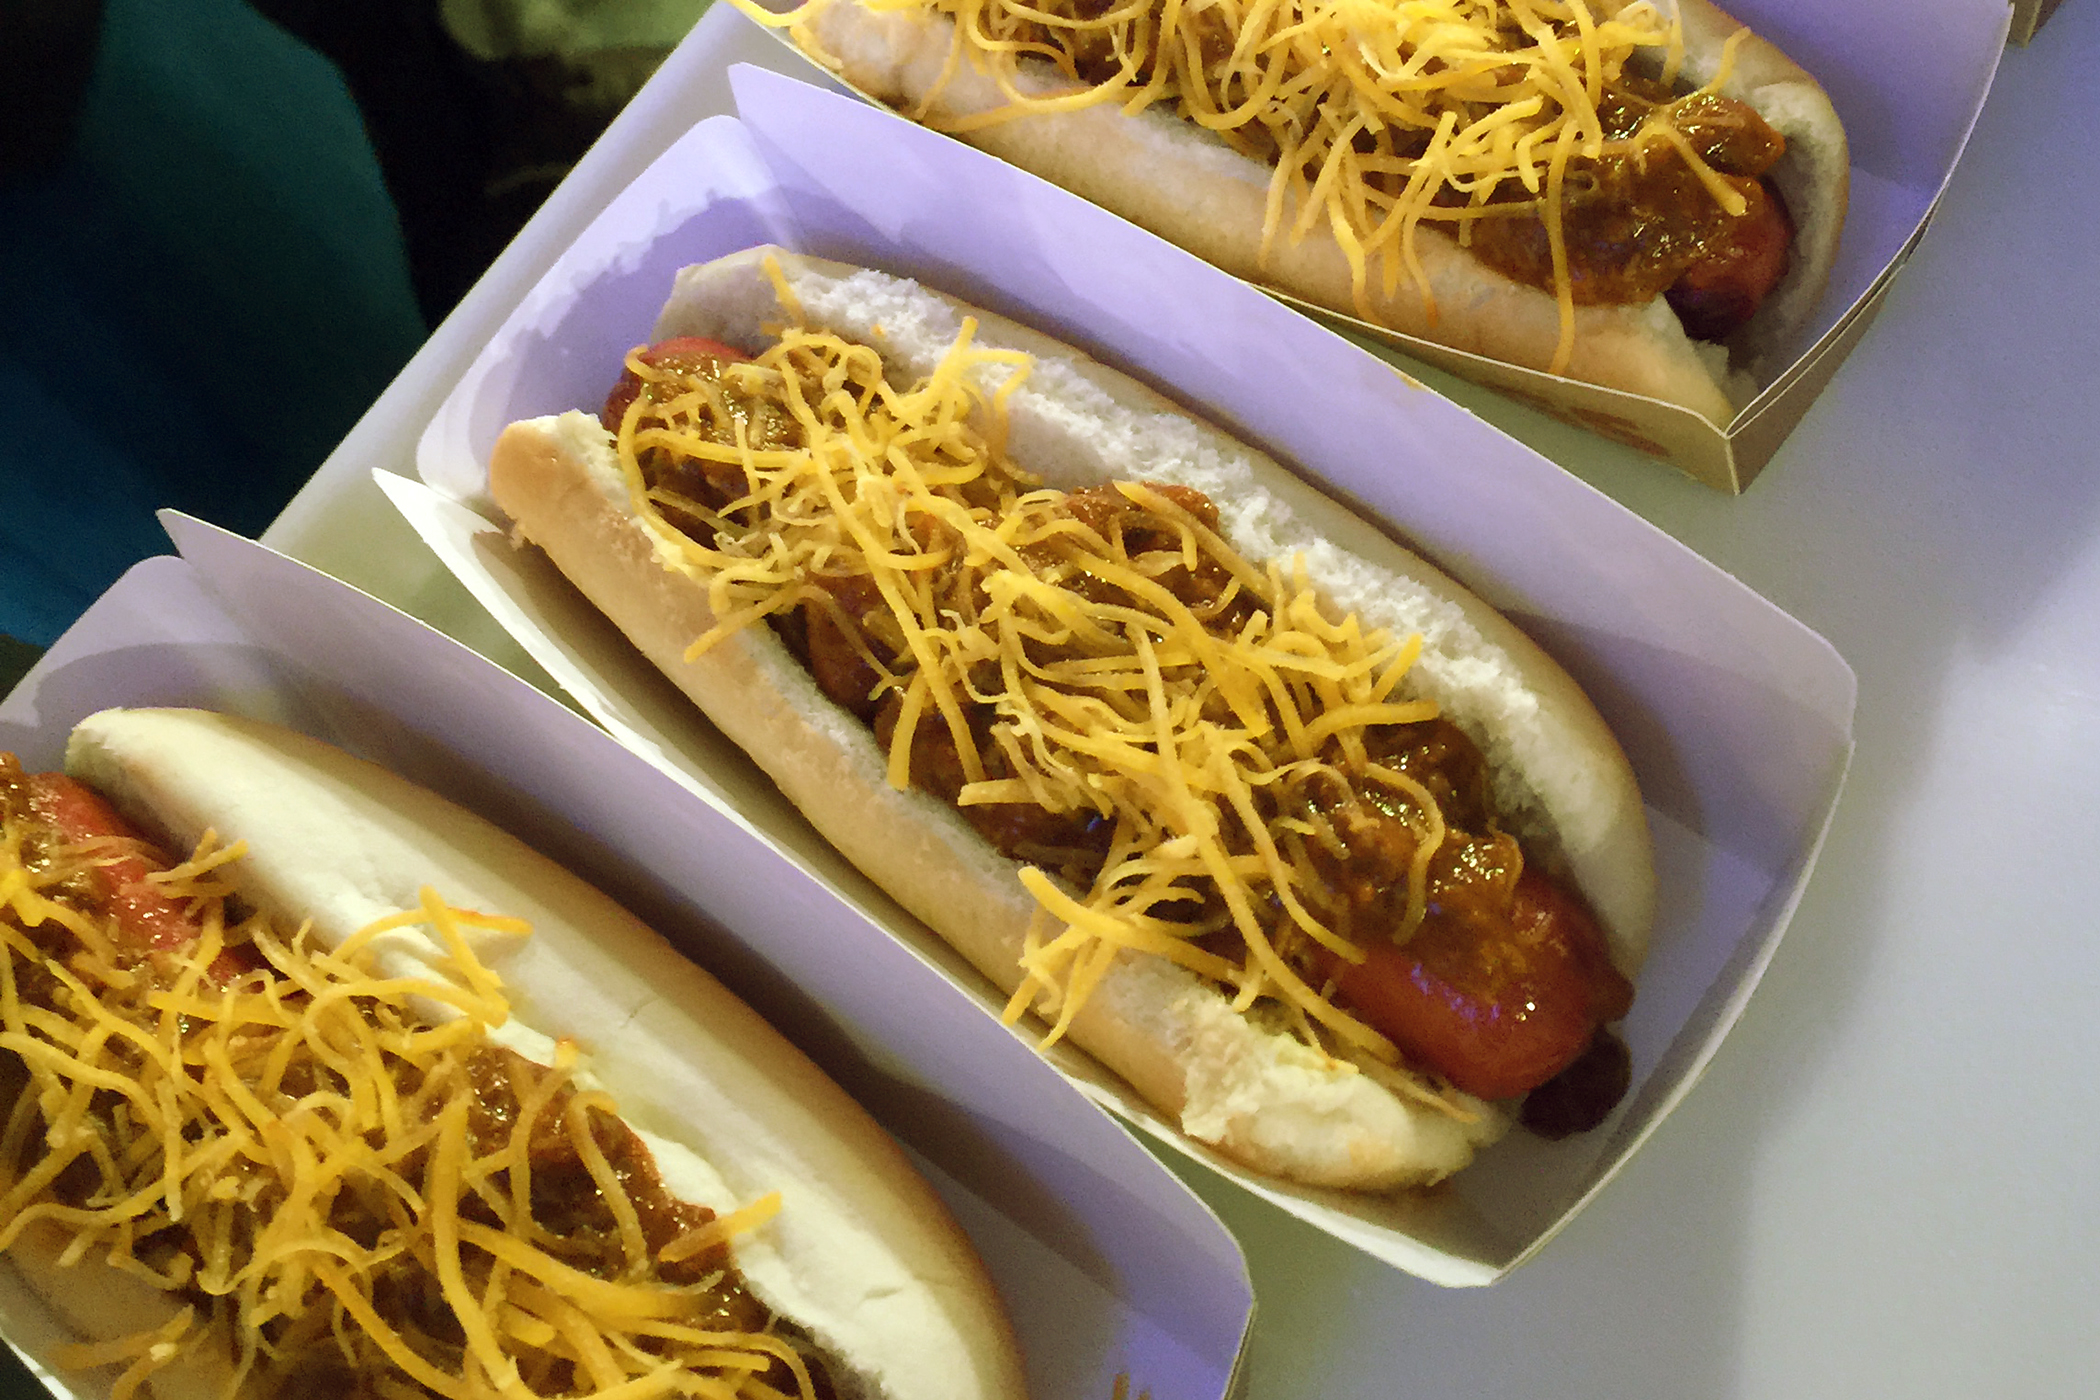 This February 9, 2016, photo, shows a Burger King  chili cheese  hot dog at a media event to introduce the restaurant's new menu item, in New York. Burger King plans to start selling the hot dogs in the U.S. on Feb. 23. The company says it will offer two options of grilled dogs, the “chili cheese” and “classic” that has relish, onions, ketchup and mustard.